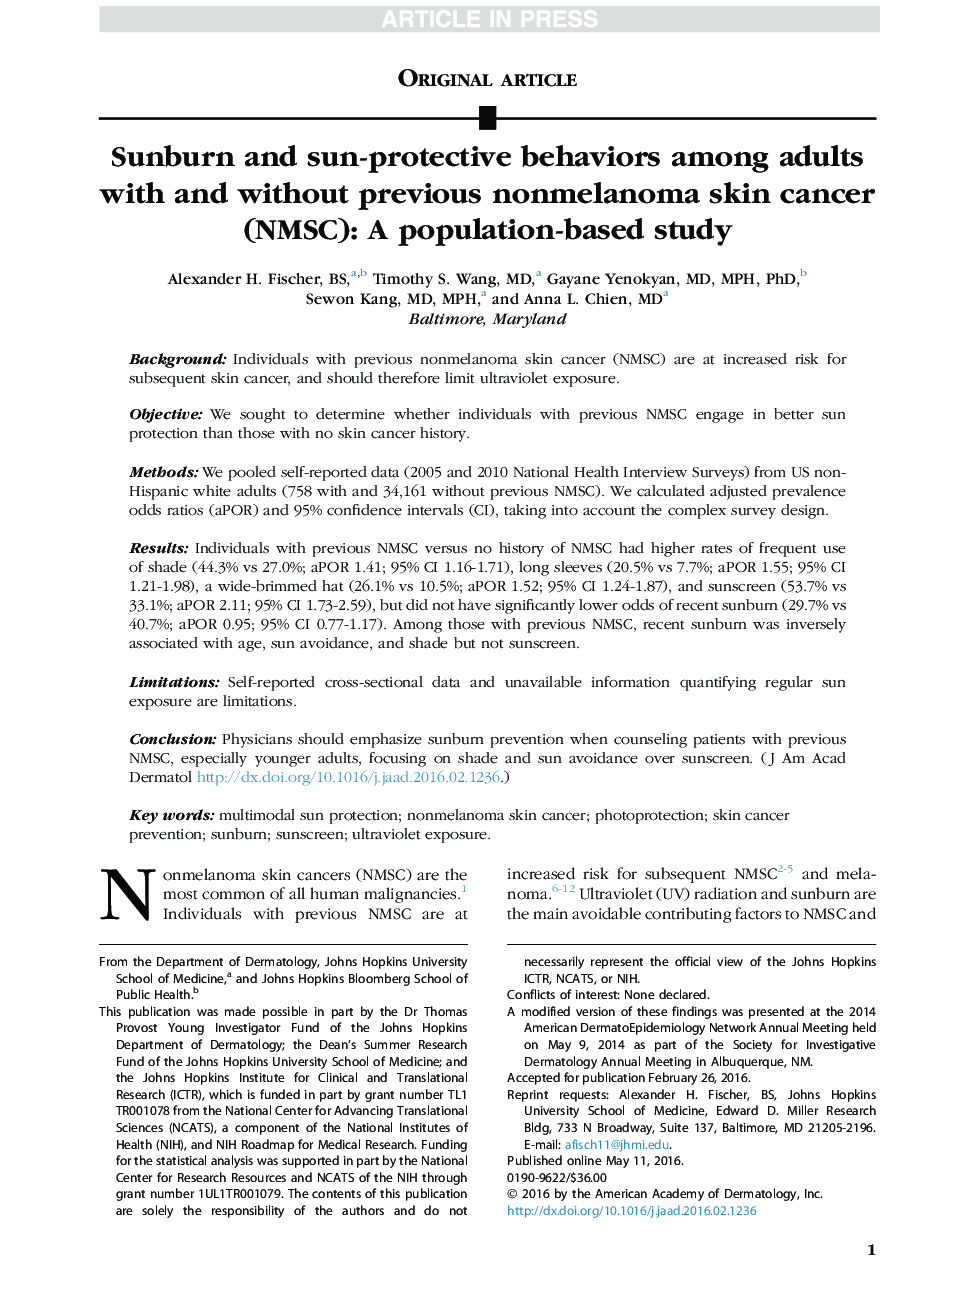 Sunburn and sun-protective behaviors among adults with and without previous nonmelanoma skin cancer (NMSC): A population-based study